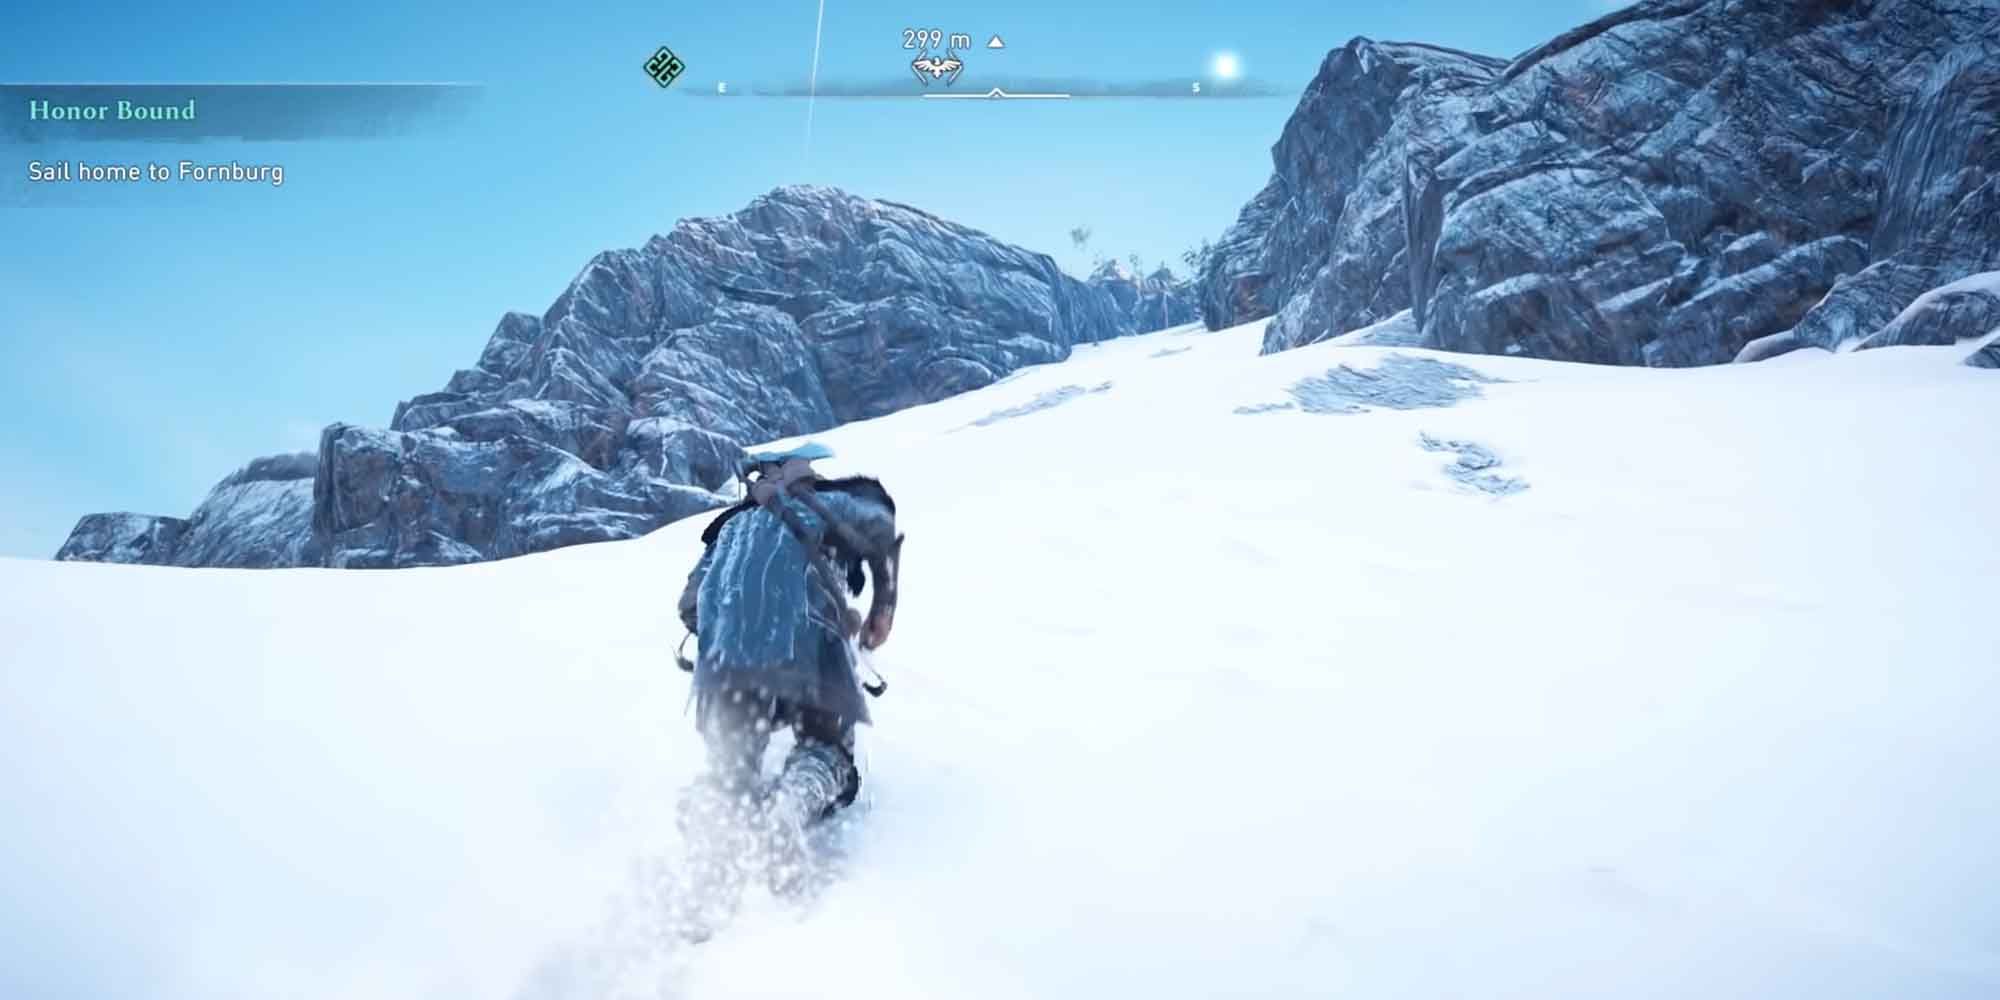 Climbing a snowy mountain in Assassin's Creed Valhalla